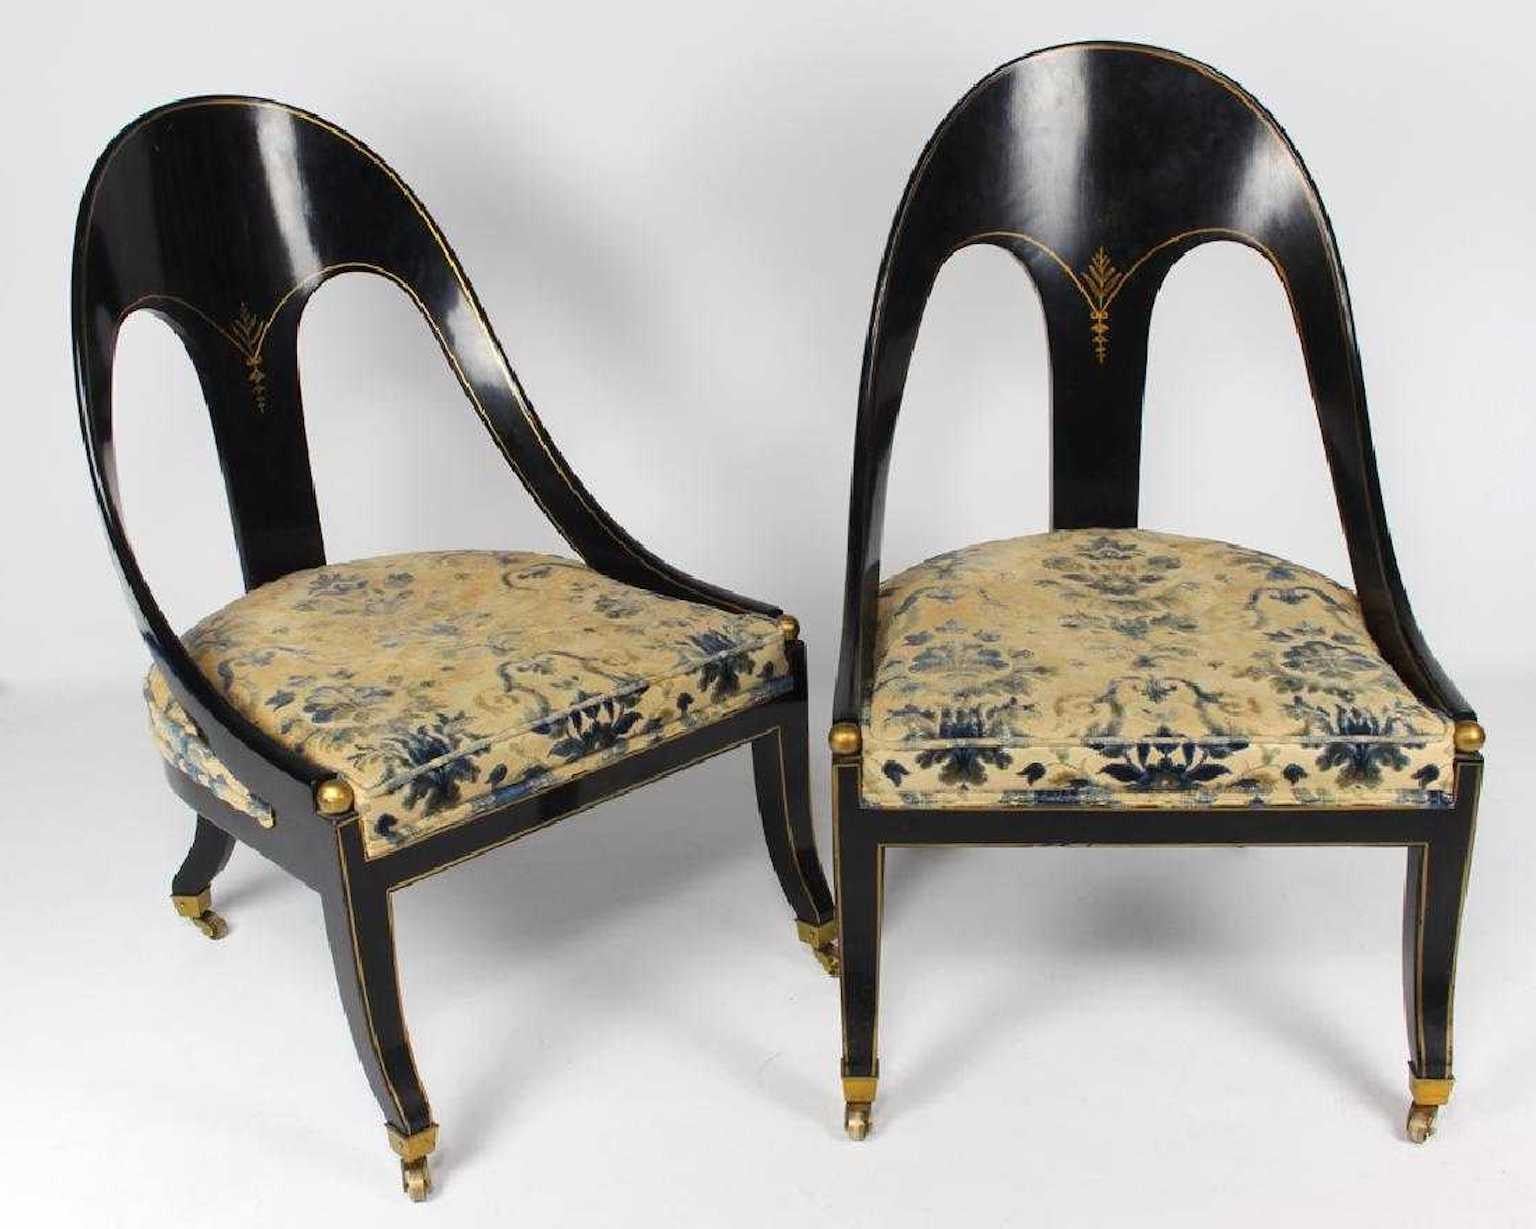 Regency Revival Pair of English Classical Spoon Back Chairs